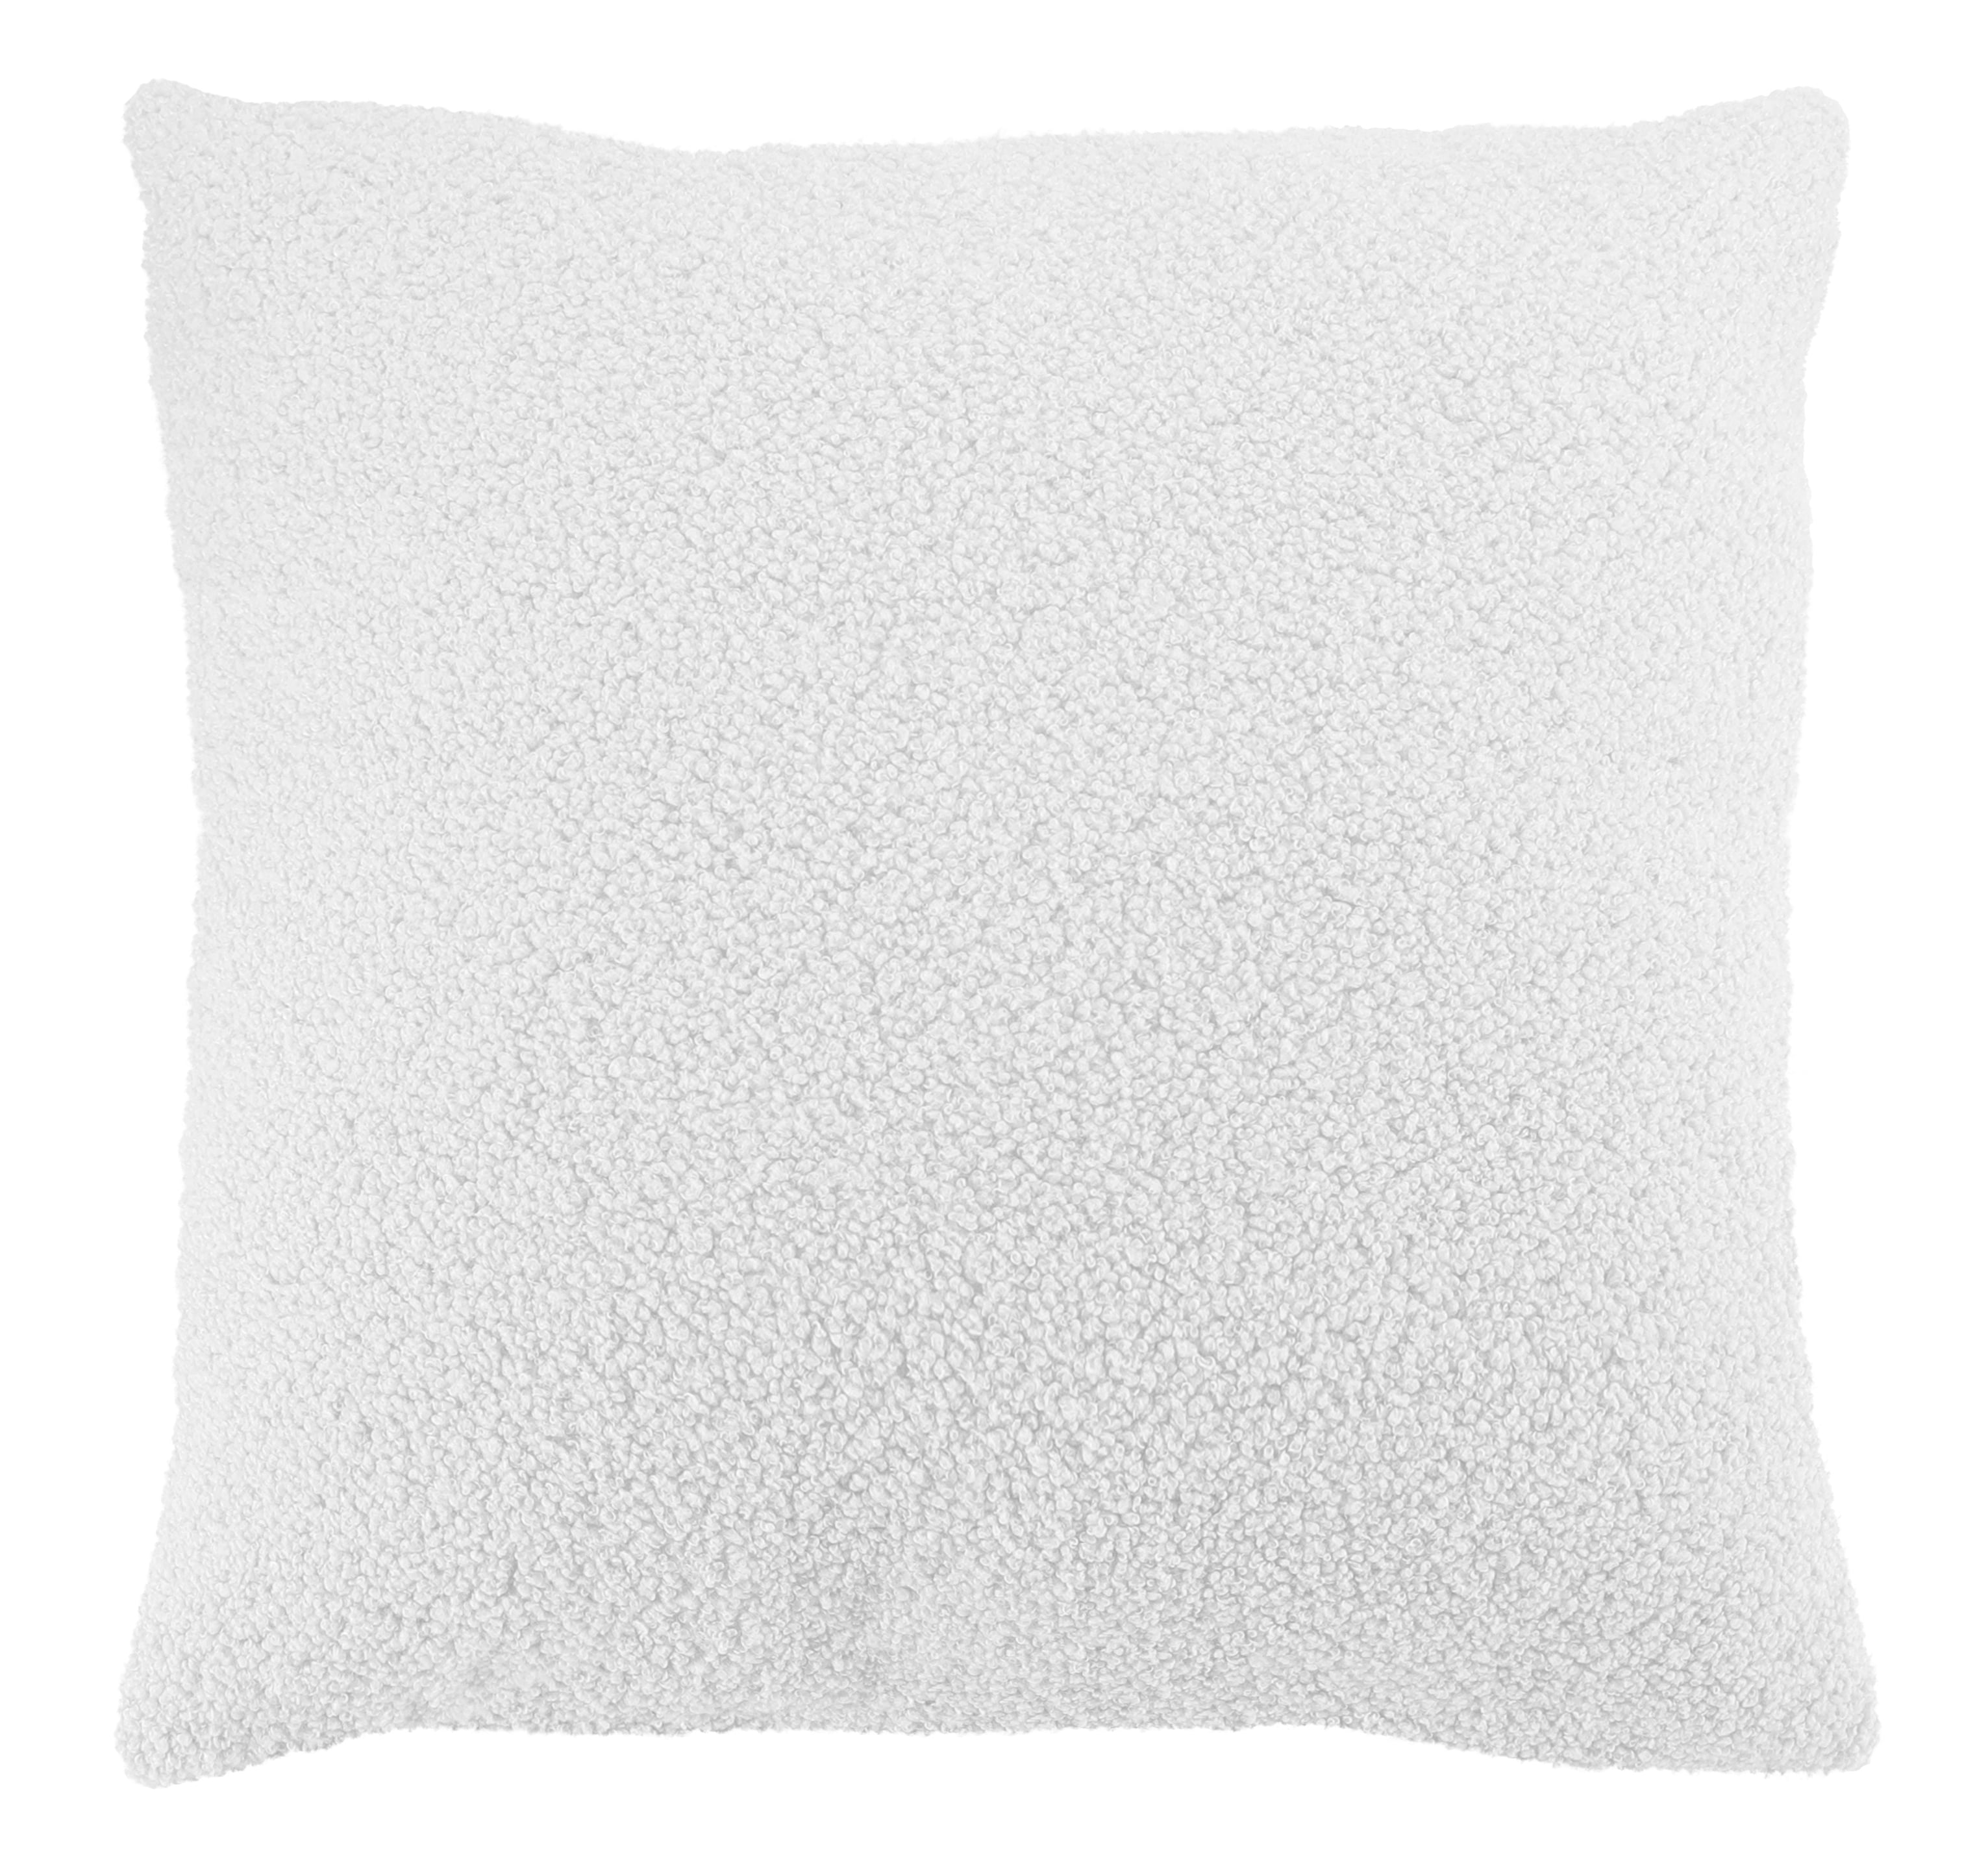 Better Homes & Gardens Sherpa Square Throw Pillow, 20